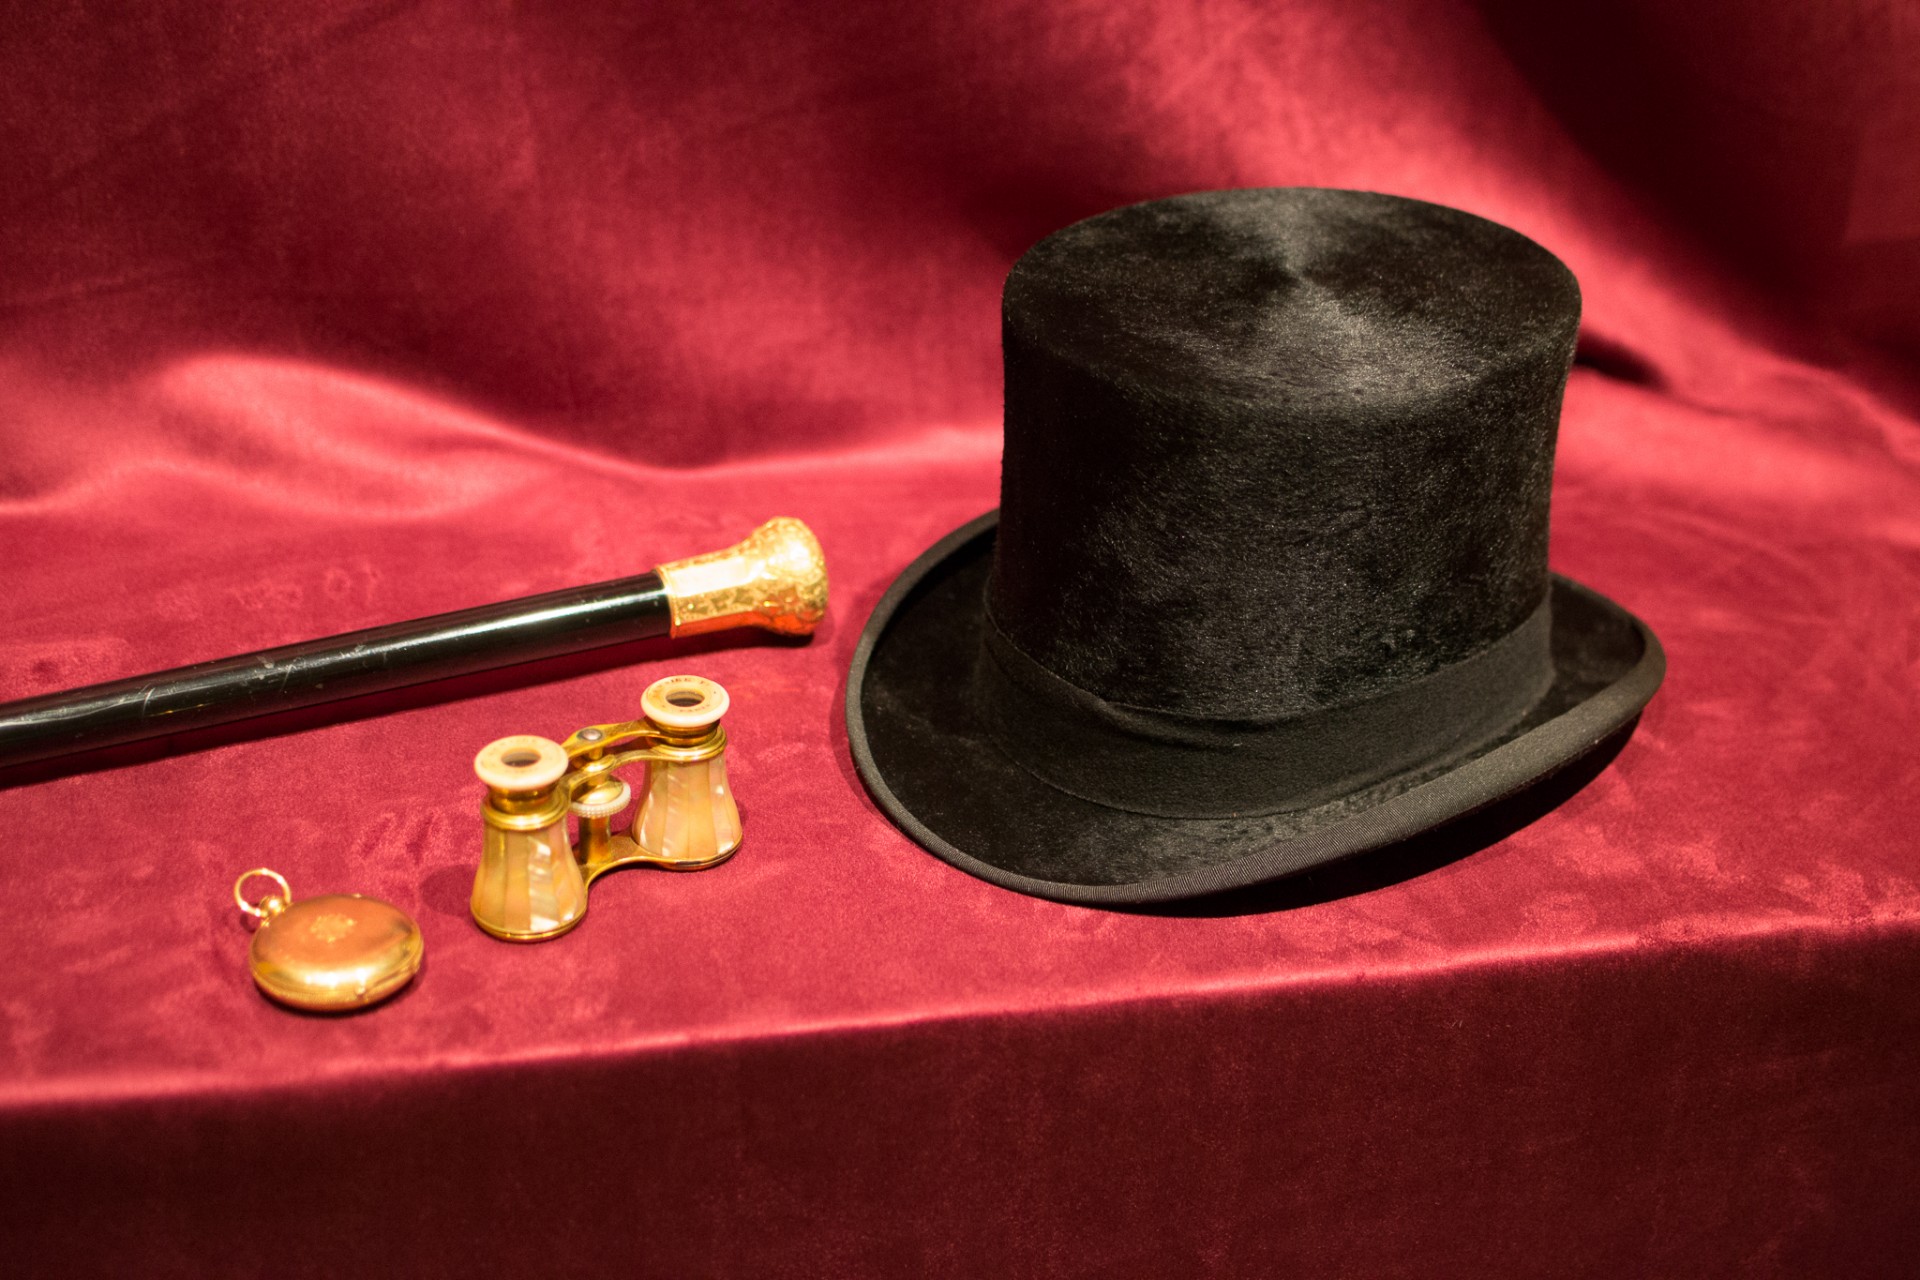 Top hat, binoculars, a stopwatch, and a cane on red velvet.